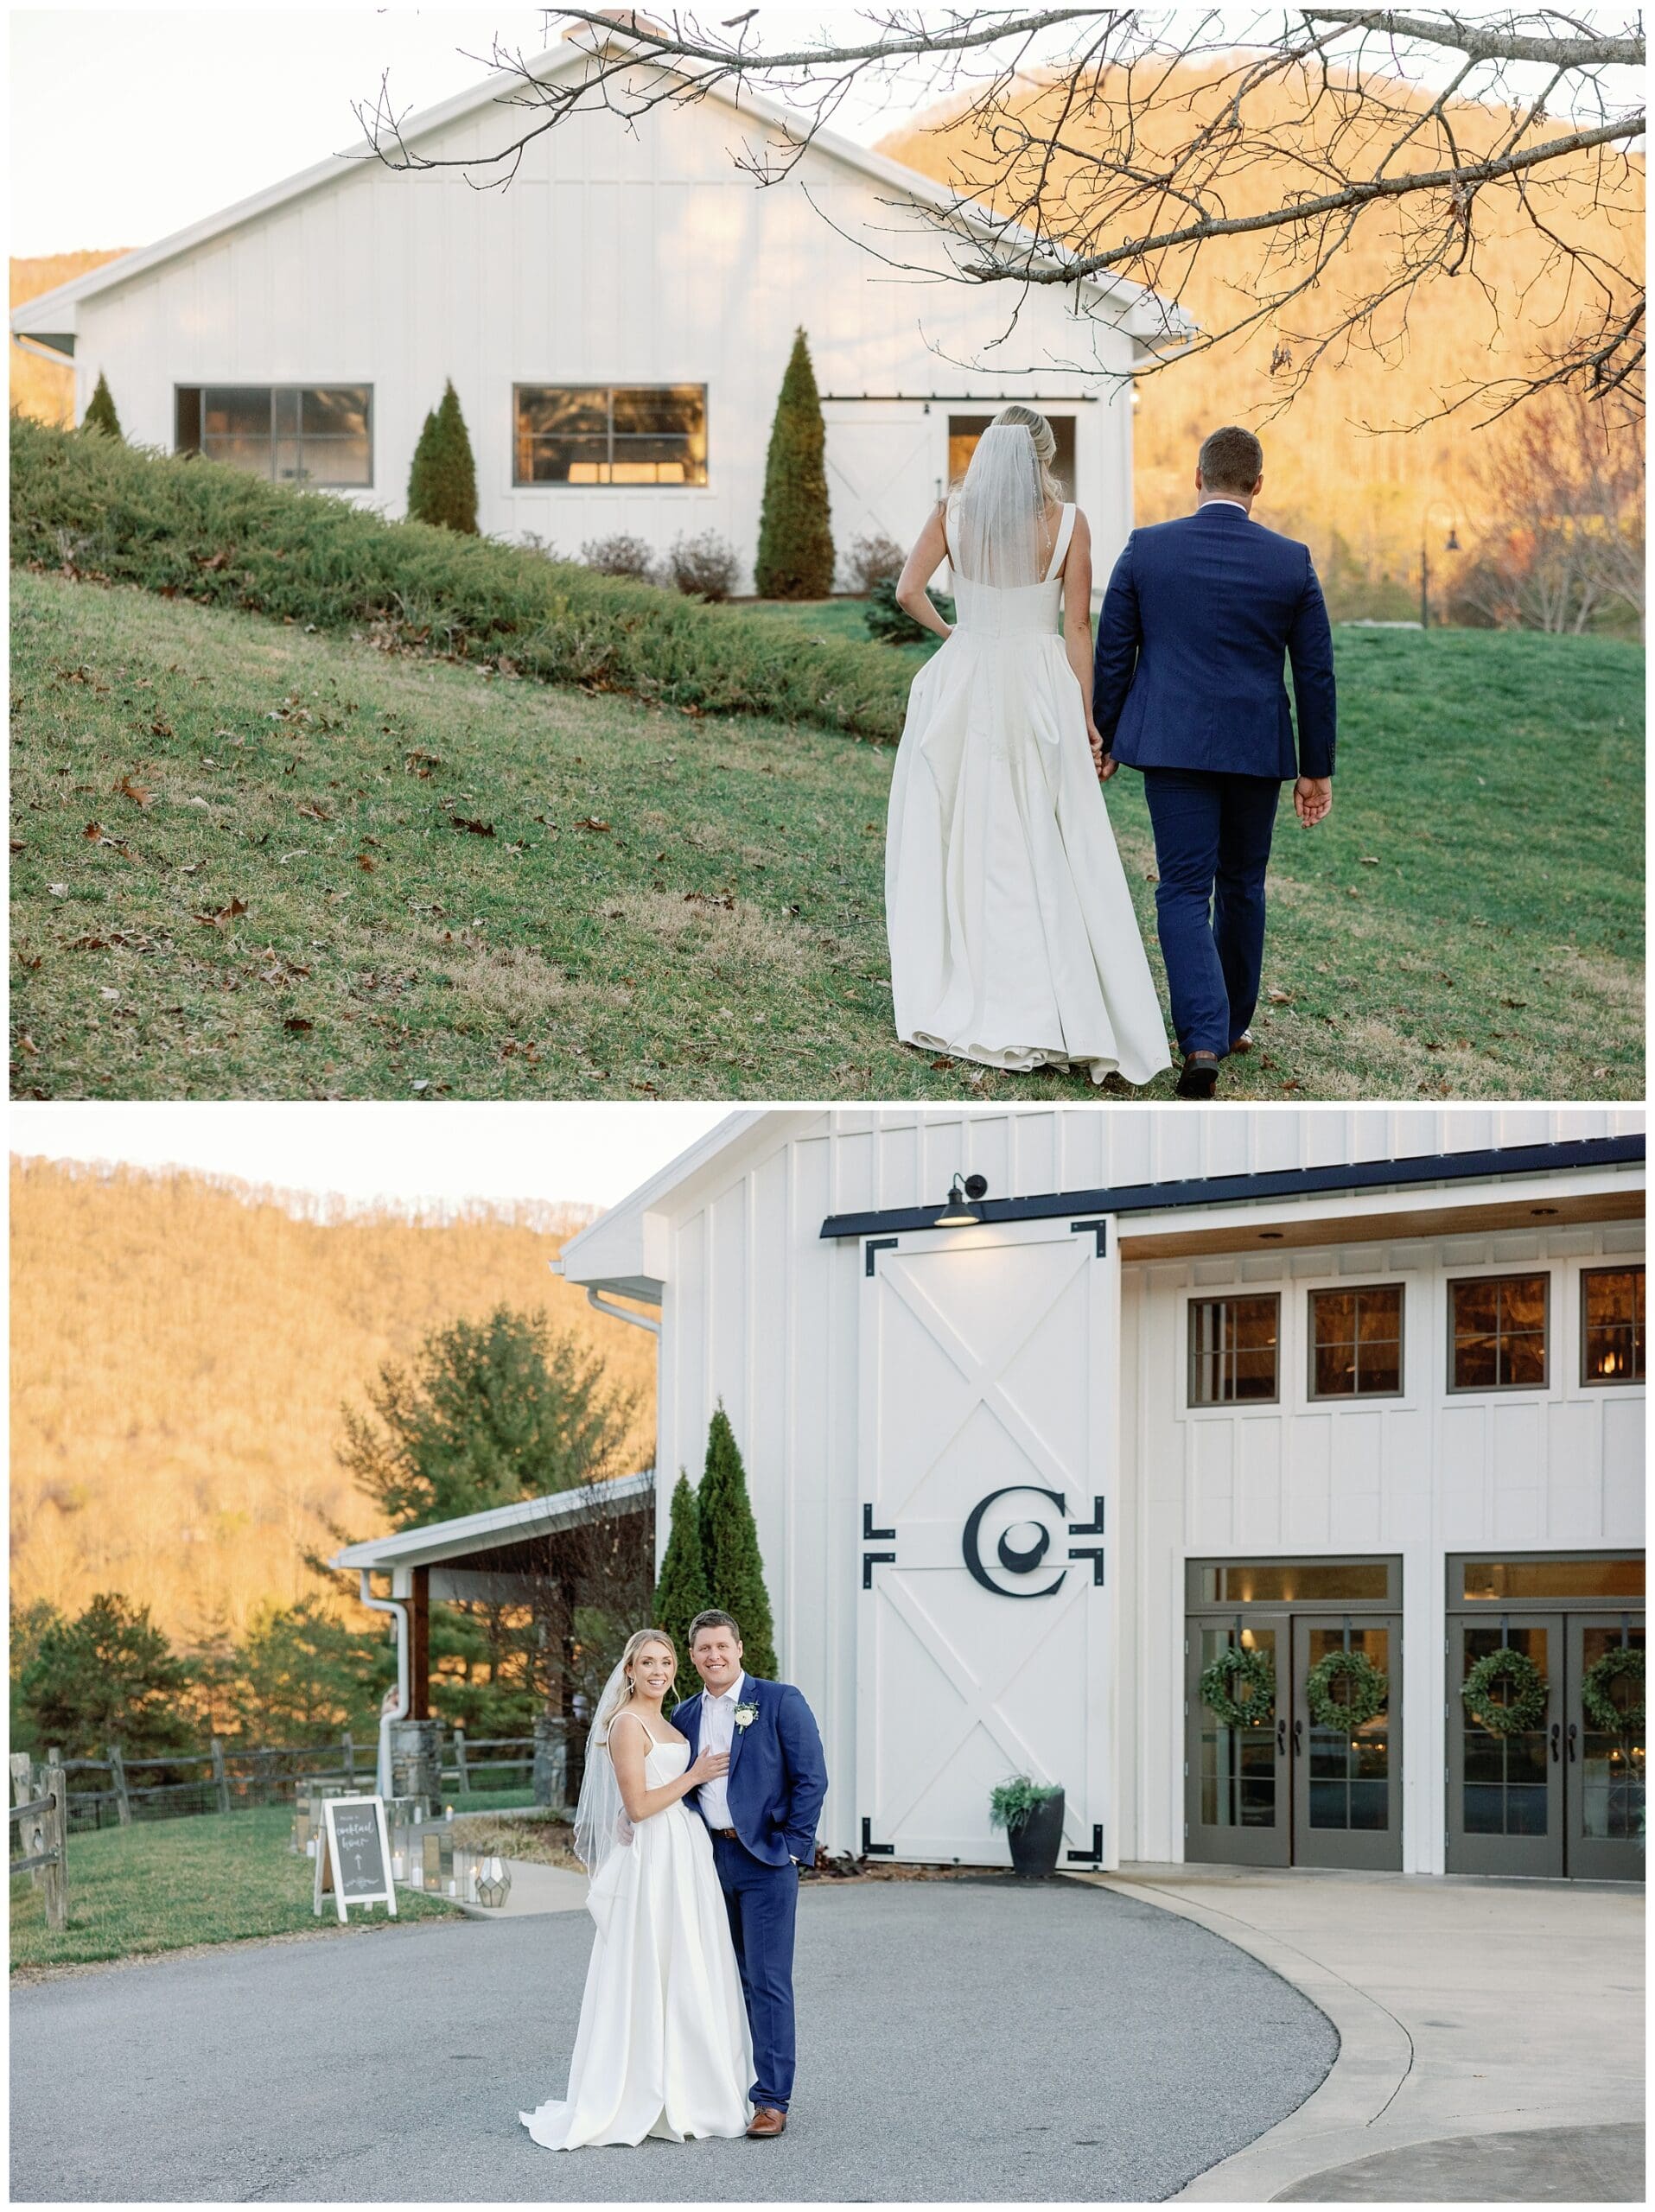 A bride and groom walking in front of a barn.